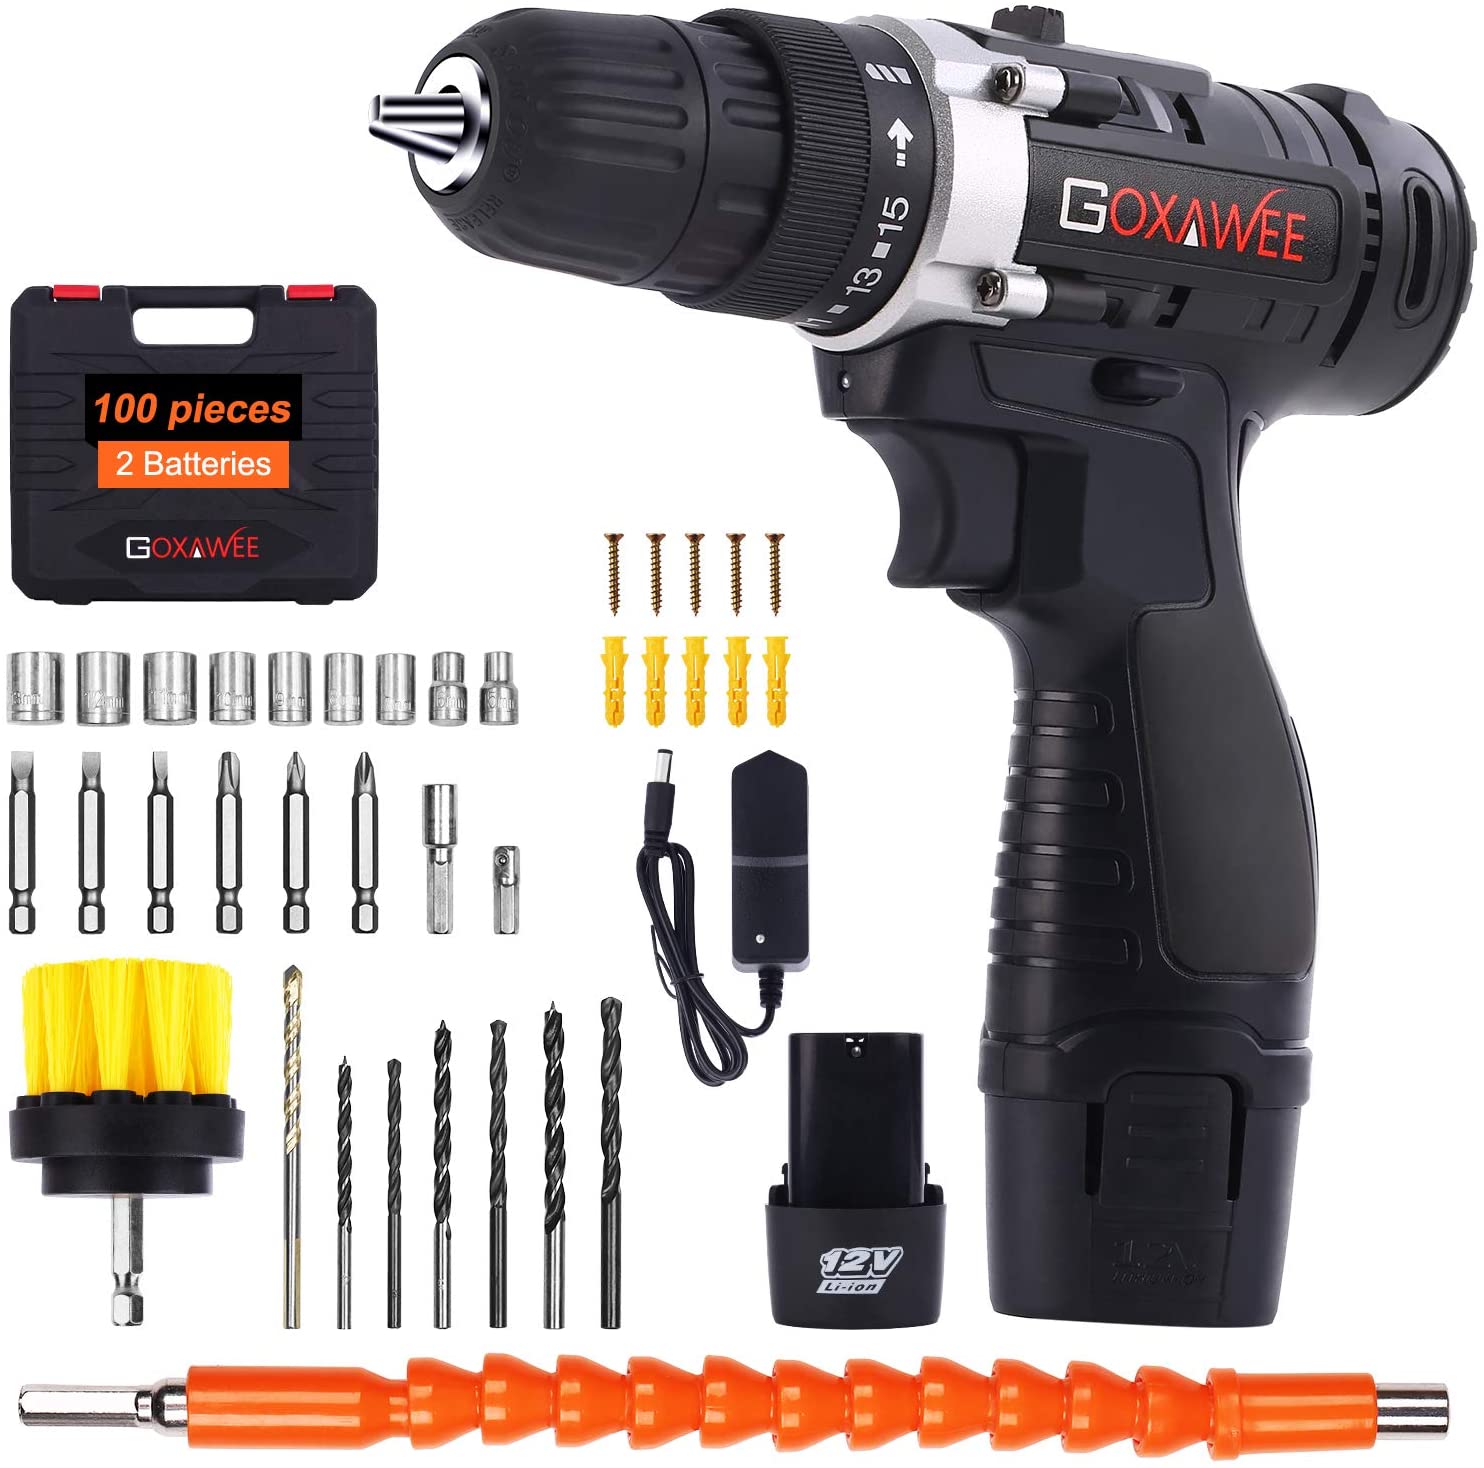 Cordless Drill Driver 12V, GOXAWEE 100Pcs Electric Screwdriver Set (2 Batteries 1500mAh, Max Torque 30Nm, 2-Speed, 10mm Automatic Chuck) for Home Improvement & DIY Project